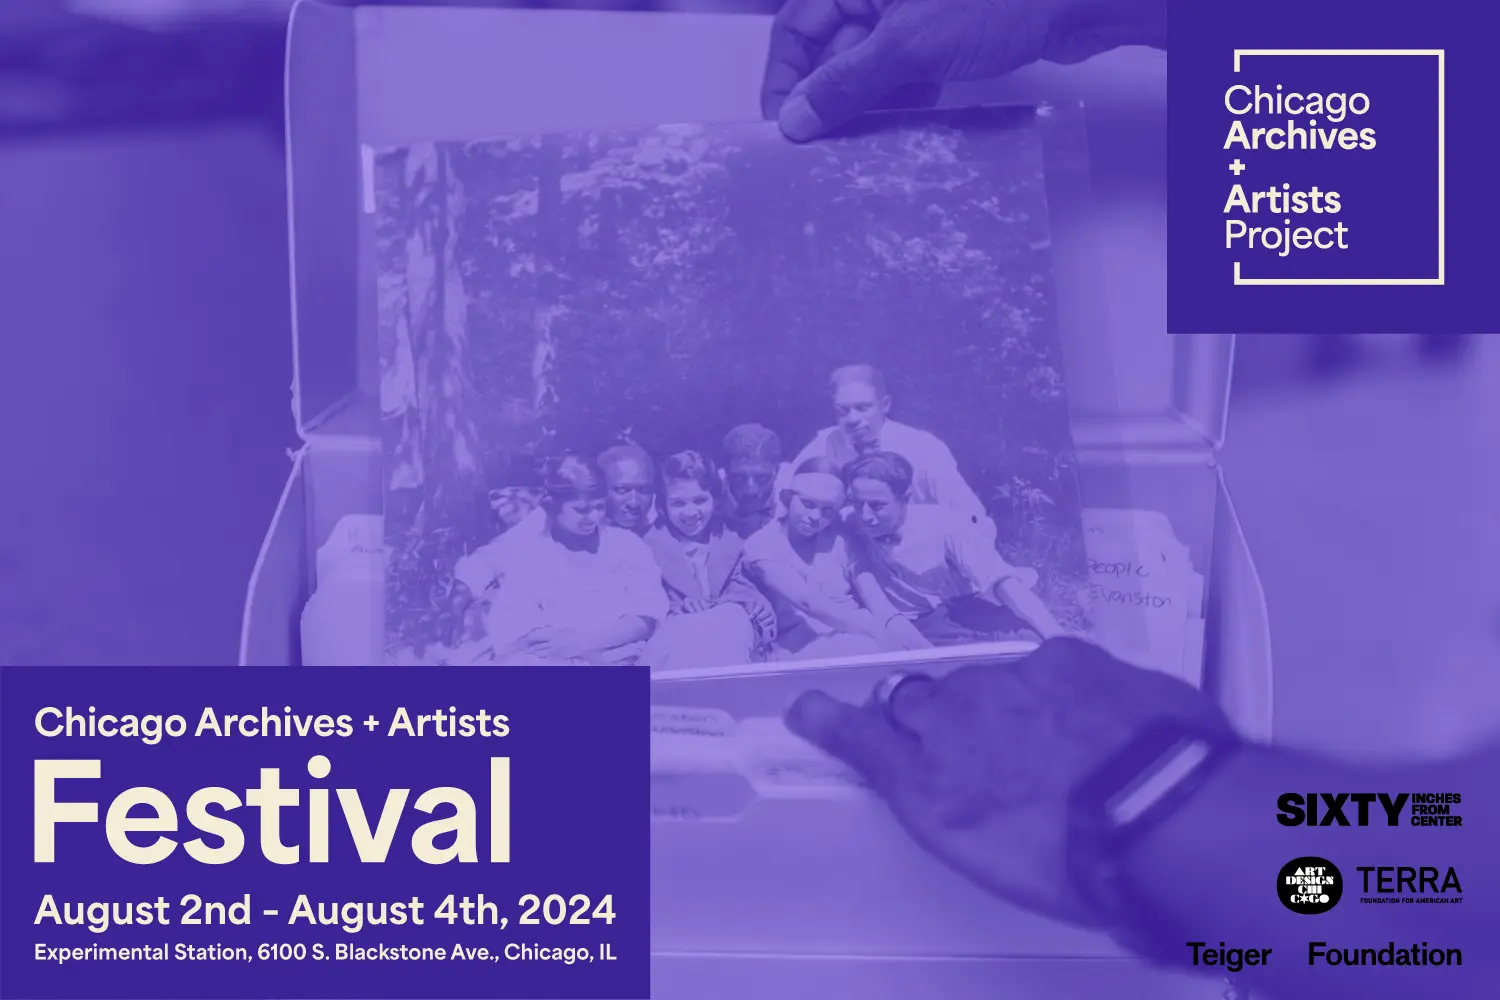 Image: A monochromatic graphic in shades of purple. In the background, a hand pair of hands hold a photograph. In the foreground, white text on a purple background reads: “Chicago Archives + Artists Festival, August 2nd – August 4th, 2024. Experimental Station, 6100 S. Blackstone Ave., Chicago, IL.” On the right is the Chicago Archives + Artists Project logo. In the bottom left corner are black logos for Sixty Inches From Center, Art Design Chicago, Terra Foundation for American Art, and the Tieger Foundation. Image: A monochromatic graphic in shades of purple. In the background, a hand pair of hands hold a photograph. In the foreground, white text on a purple background reads: “Chicago Archives + Artists Festival, August 2nd – August 4th, 2024. Experimental Station, 6100 S. Blackstone Ave., Chicago, IL.” On the right is the Chicago Archives + Artists Project logo. In the bottom left corner are black logos for Sixty Inches From Center, Art Design Chicago, Terra Foundation for American Art, and the Tieger Foundation.